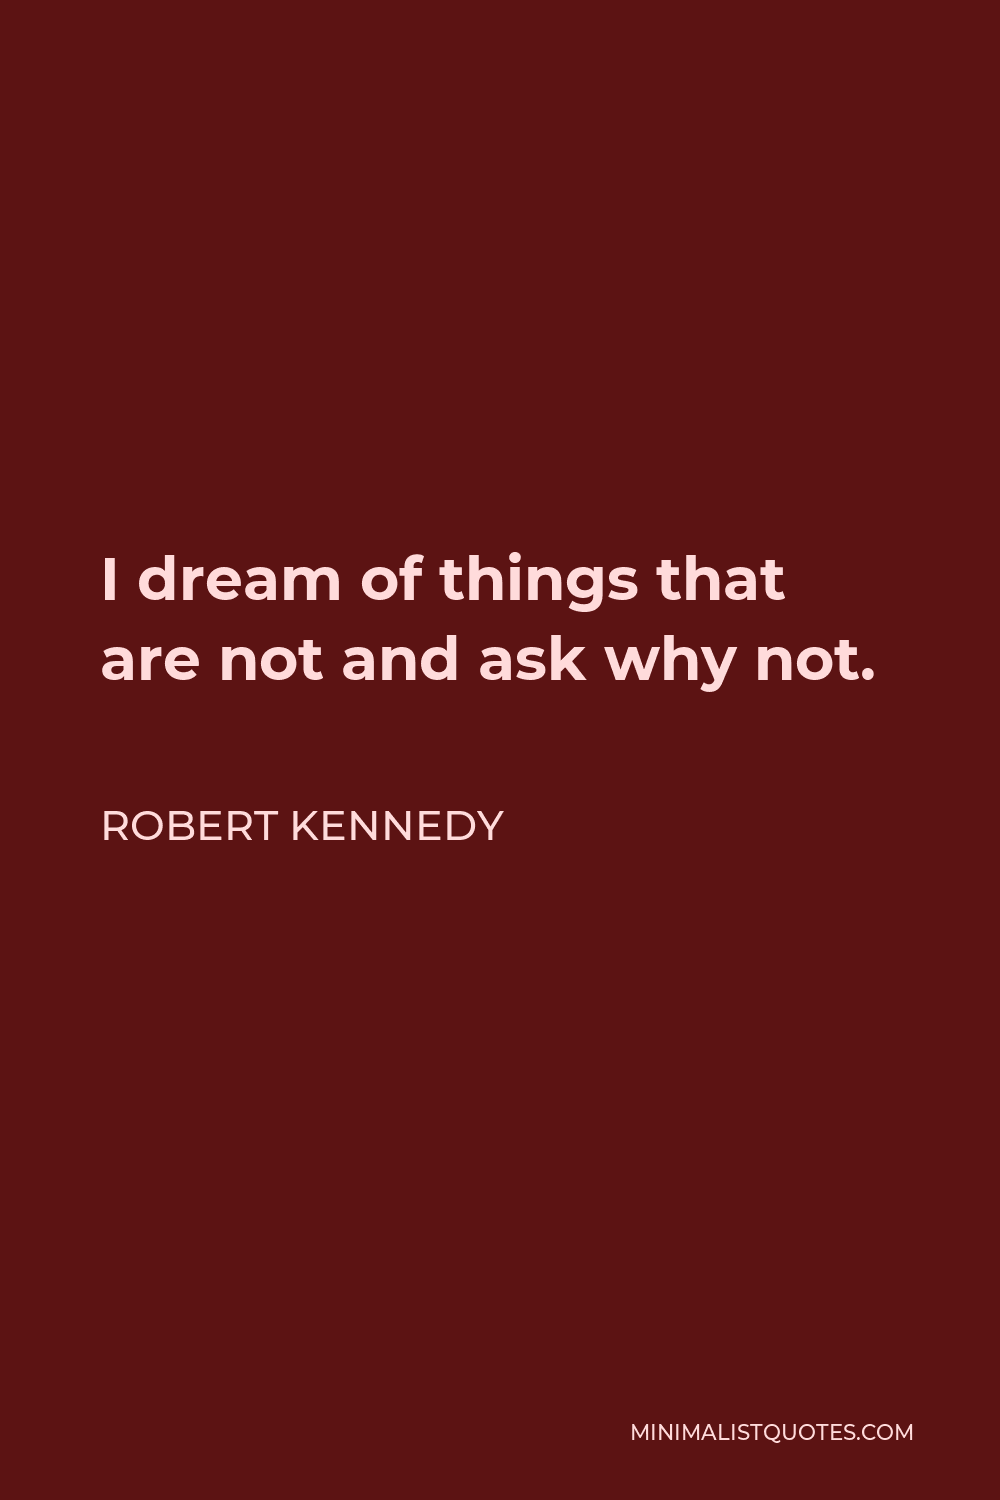 Robert Kennedy Quote - I dream of things that are not and ask why not.